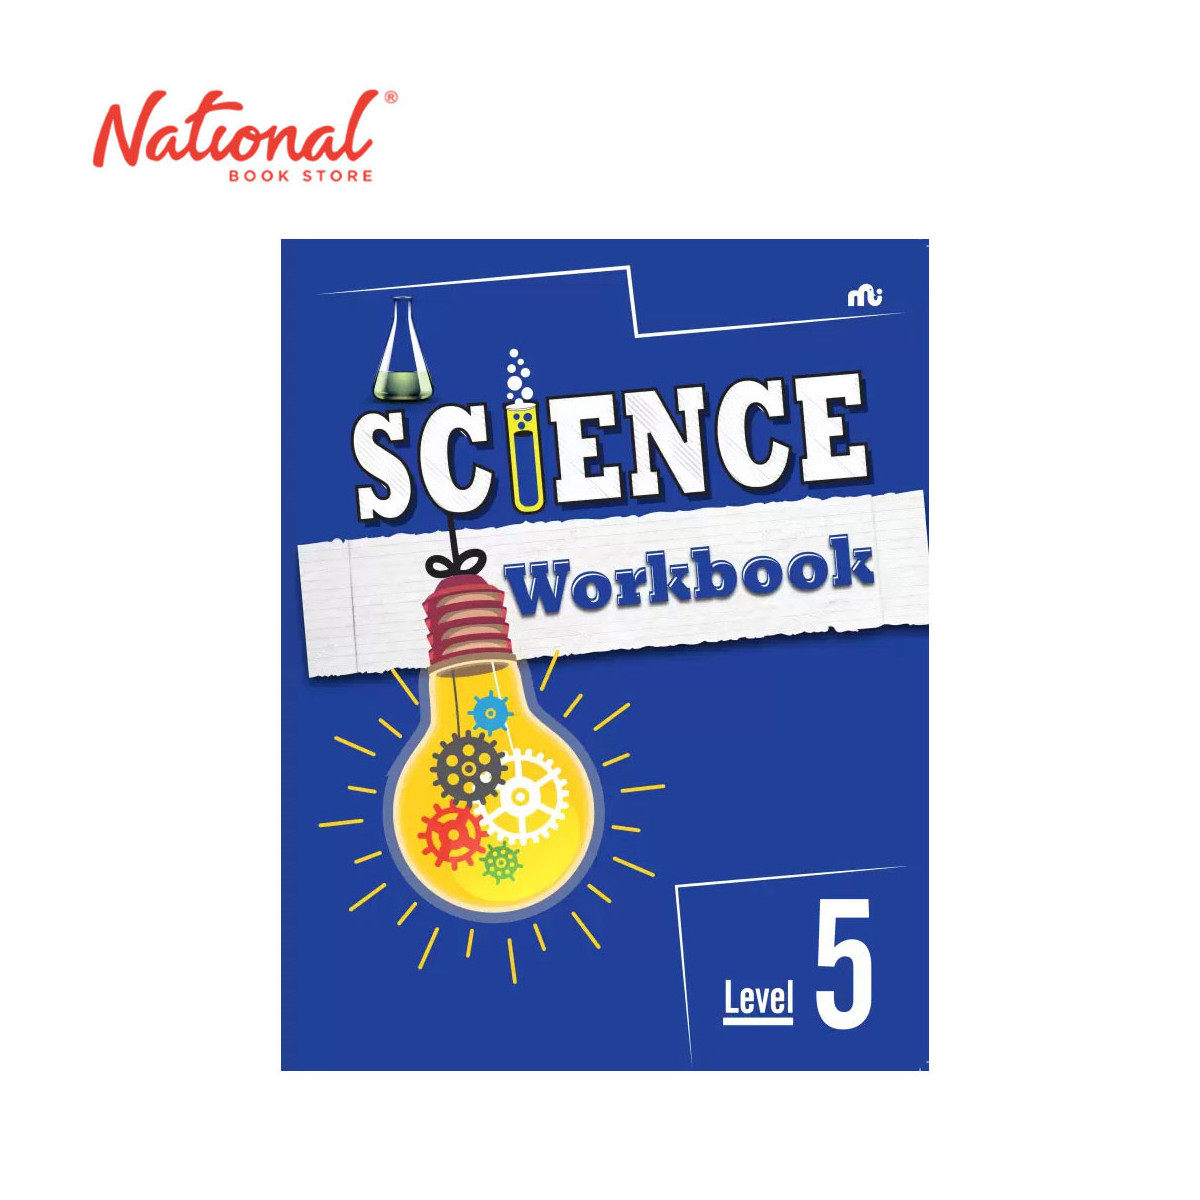 Science Workbook Level 5 - Trade Paperback - Activity Books for Kids